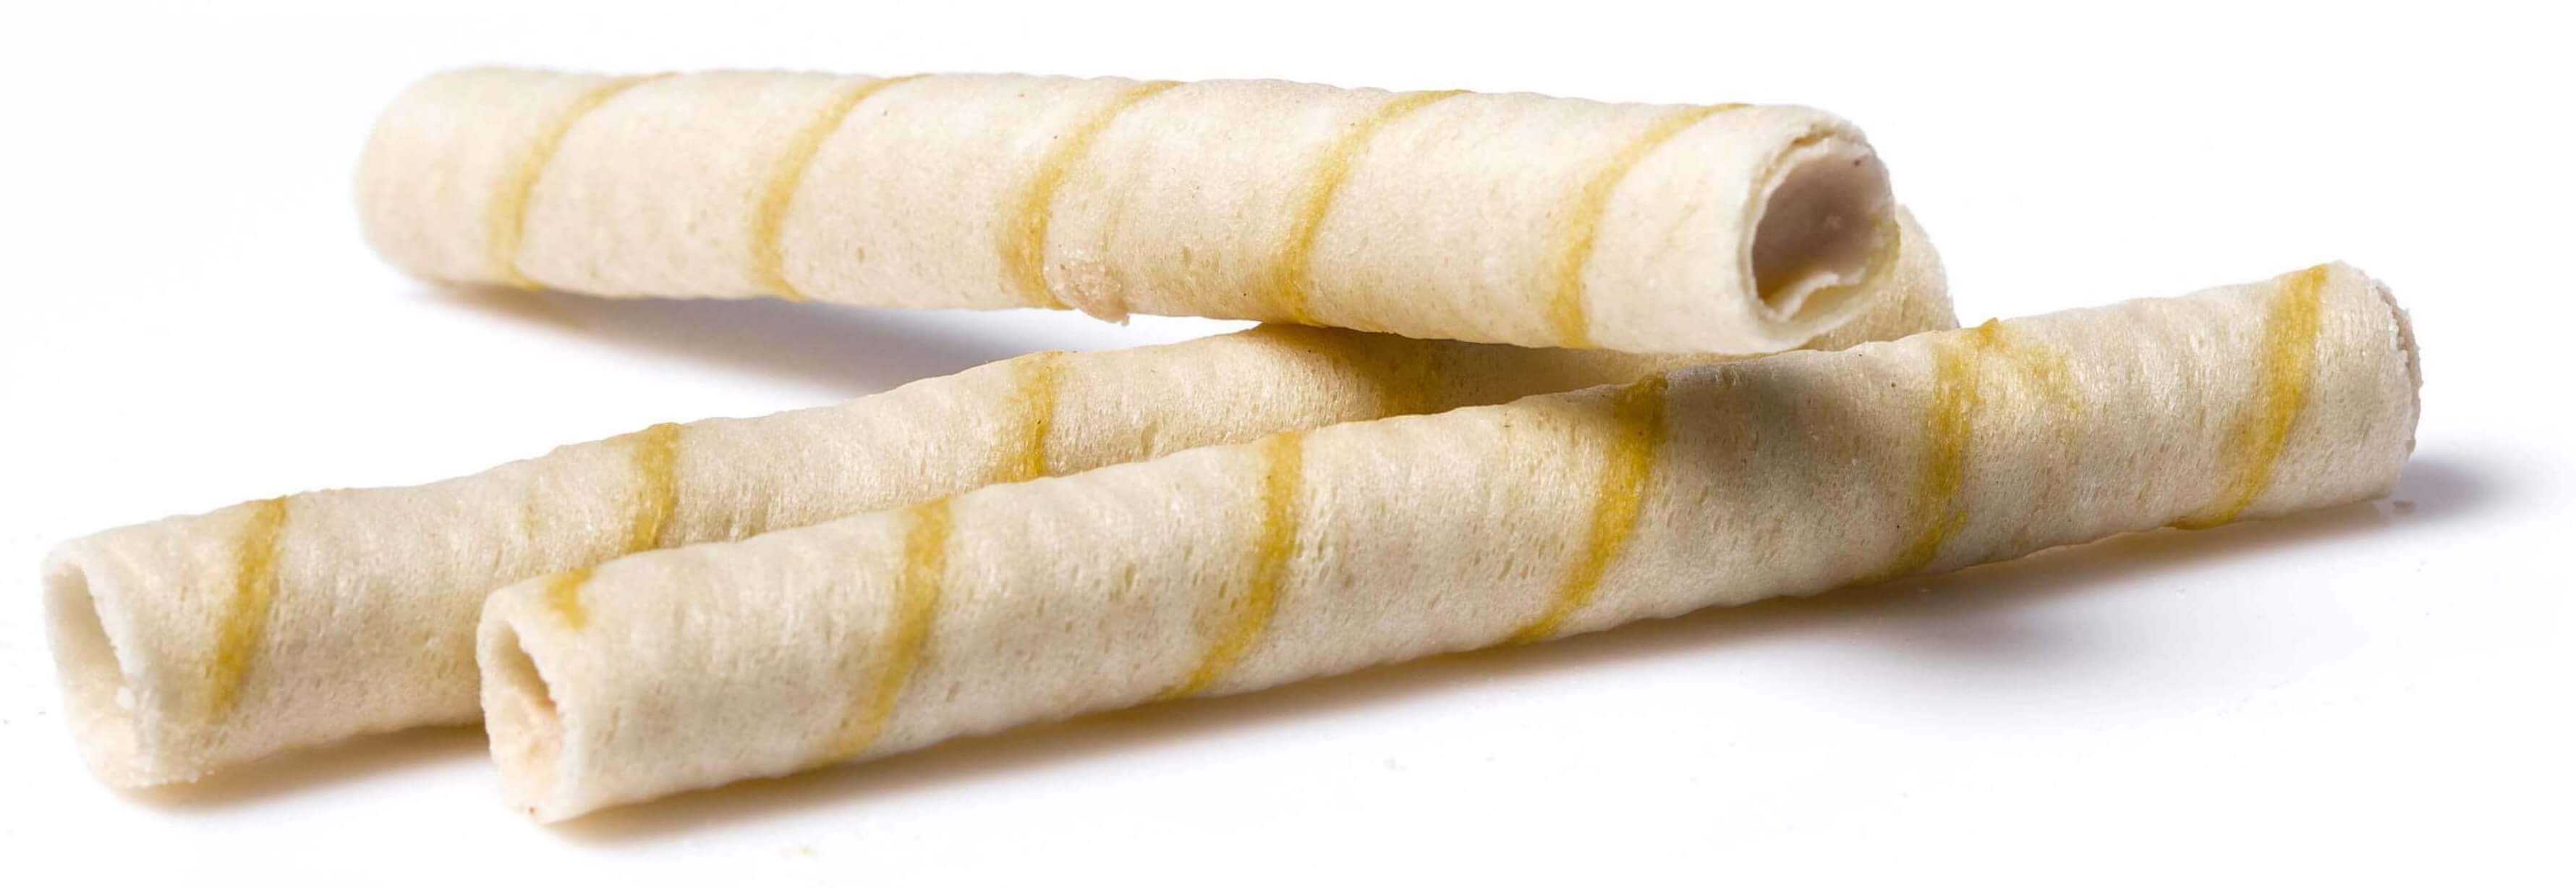 Wafers “Wafer roll” with cream flavored filling фото 1